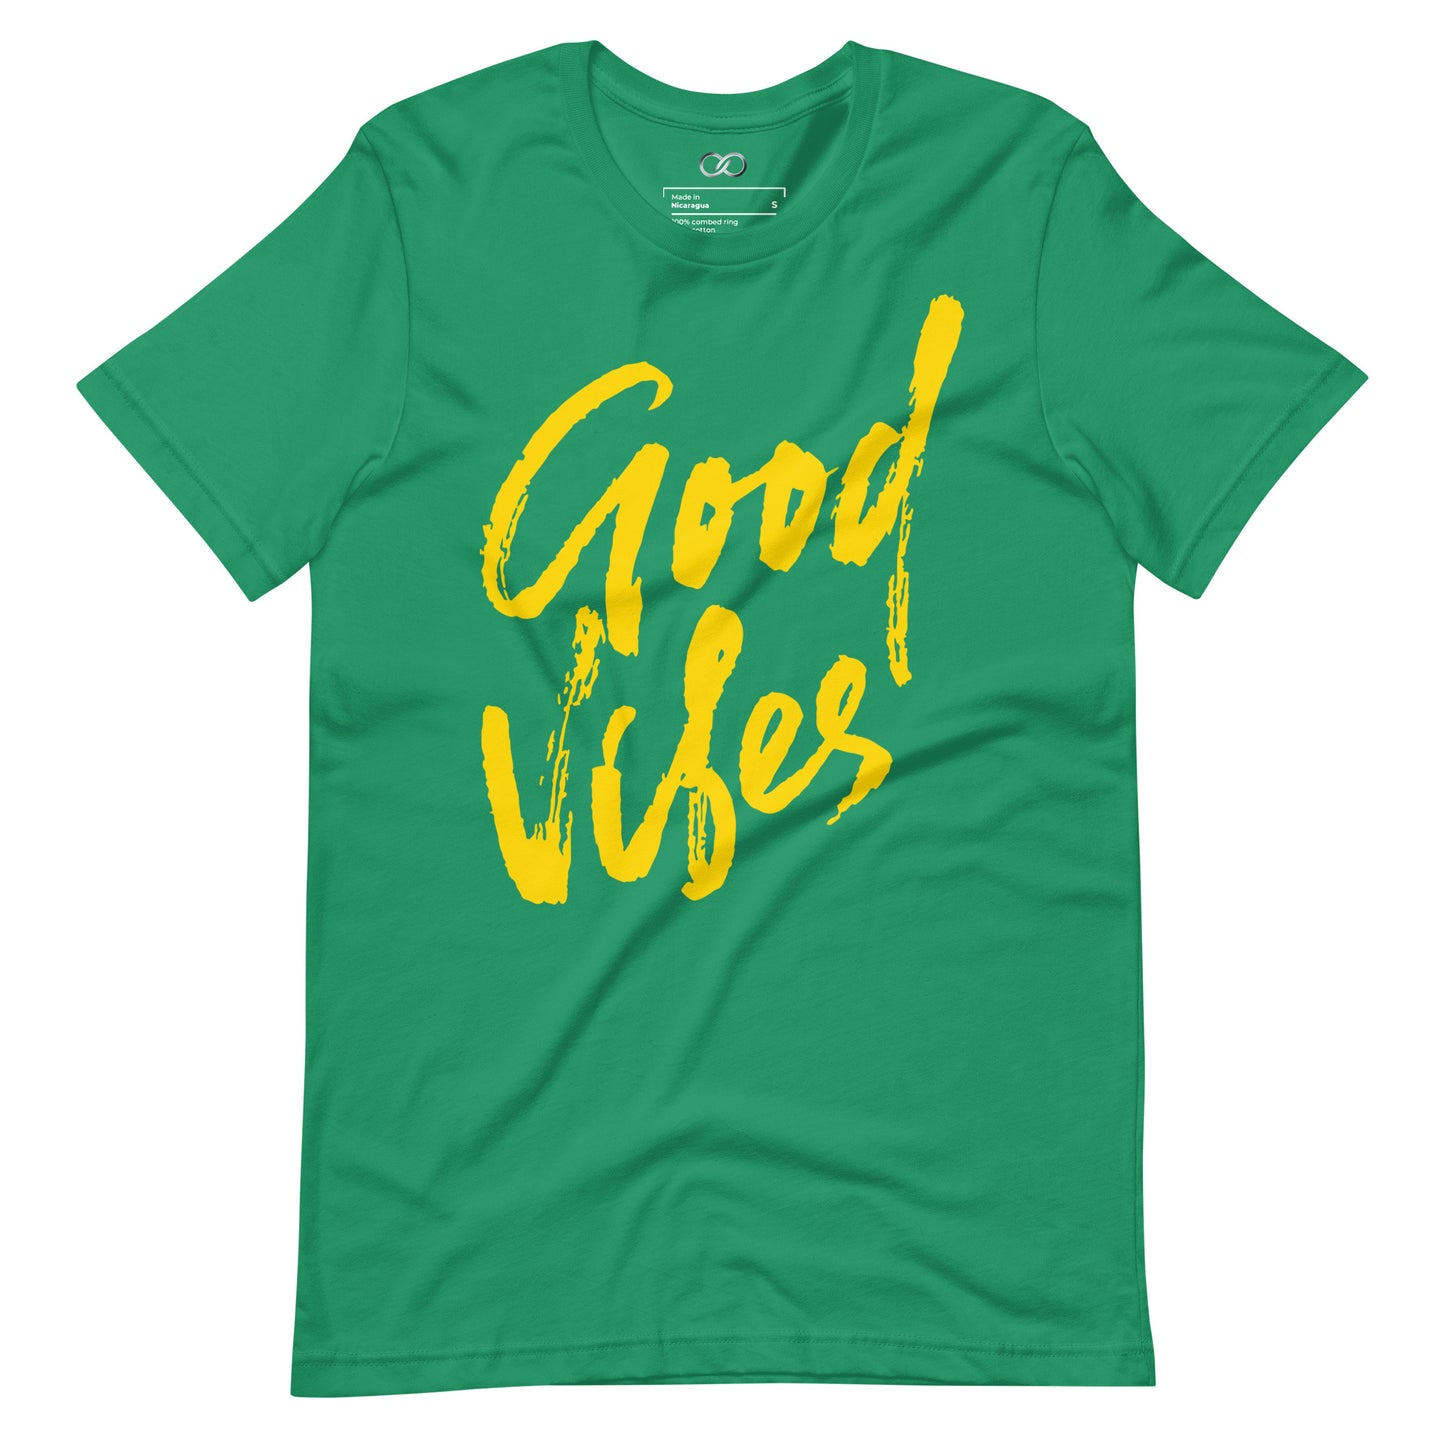 Green cotton t-shirt with 'Good Vibes' in dripping yellow paint-style graphic, exuding positivity in a relaxed fit.